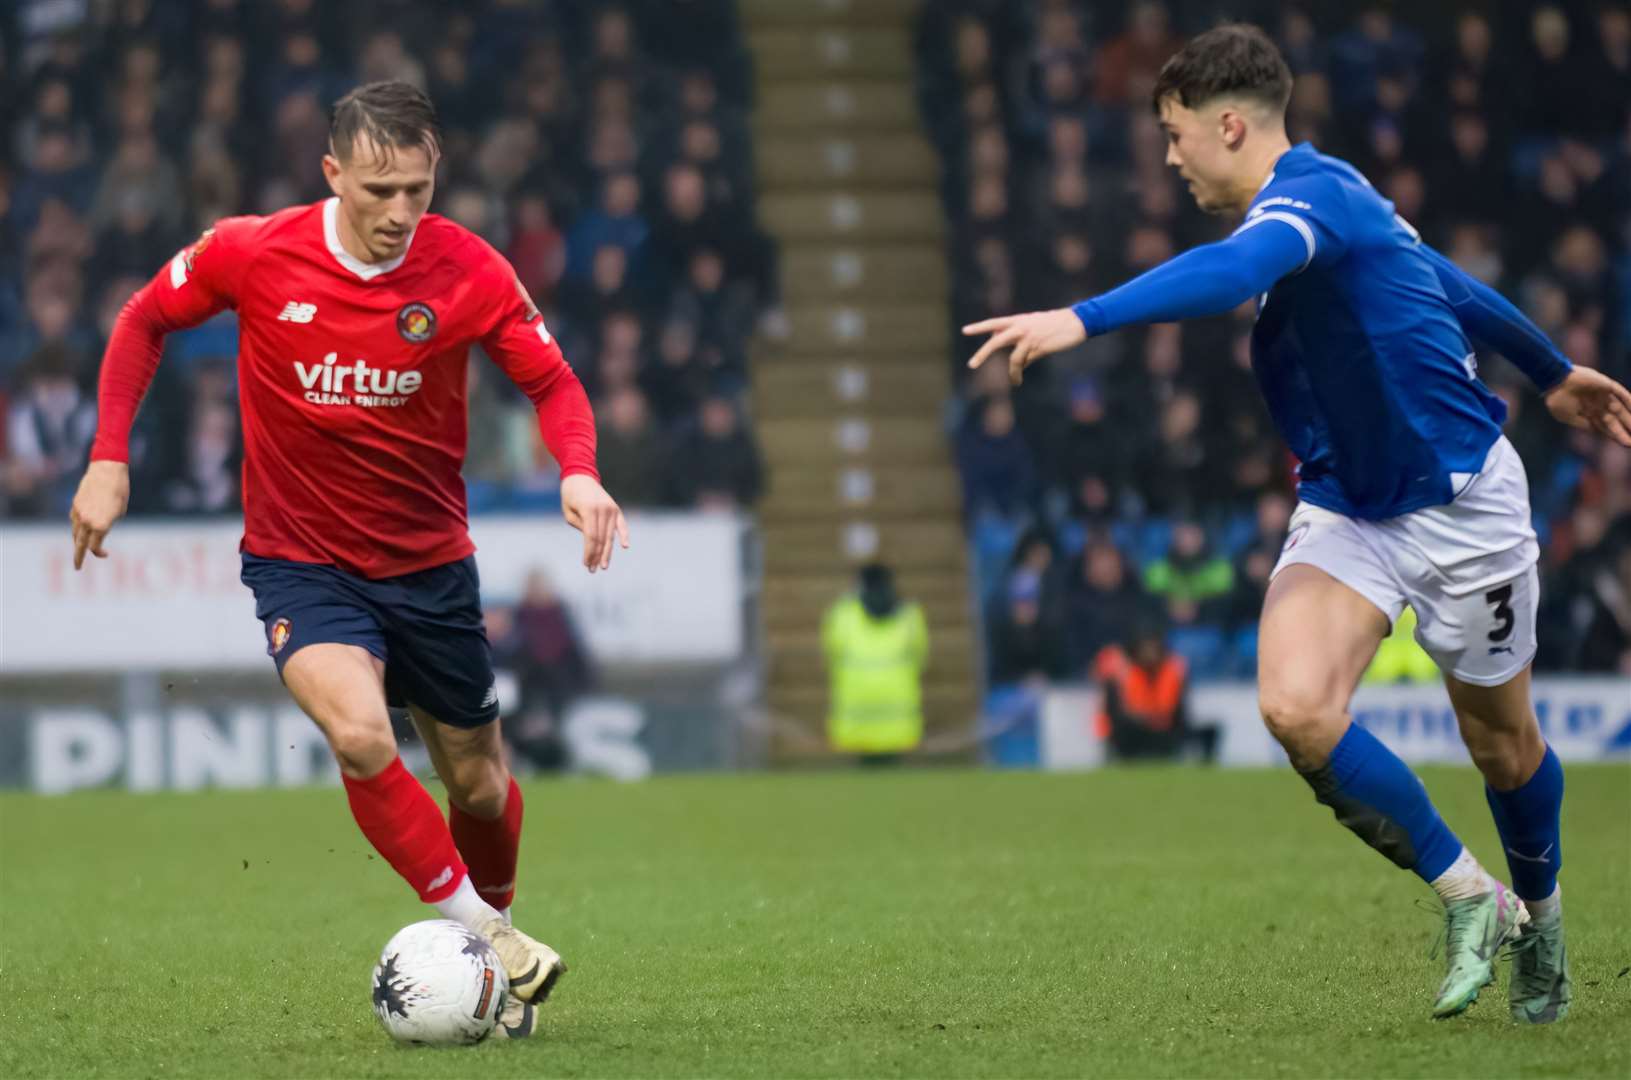 Ben Chapman in action at Chesterfield last month when he scored in a 2-2 draw. Picture: Ed Miller/EUFC